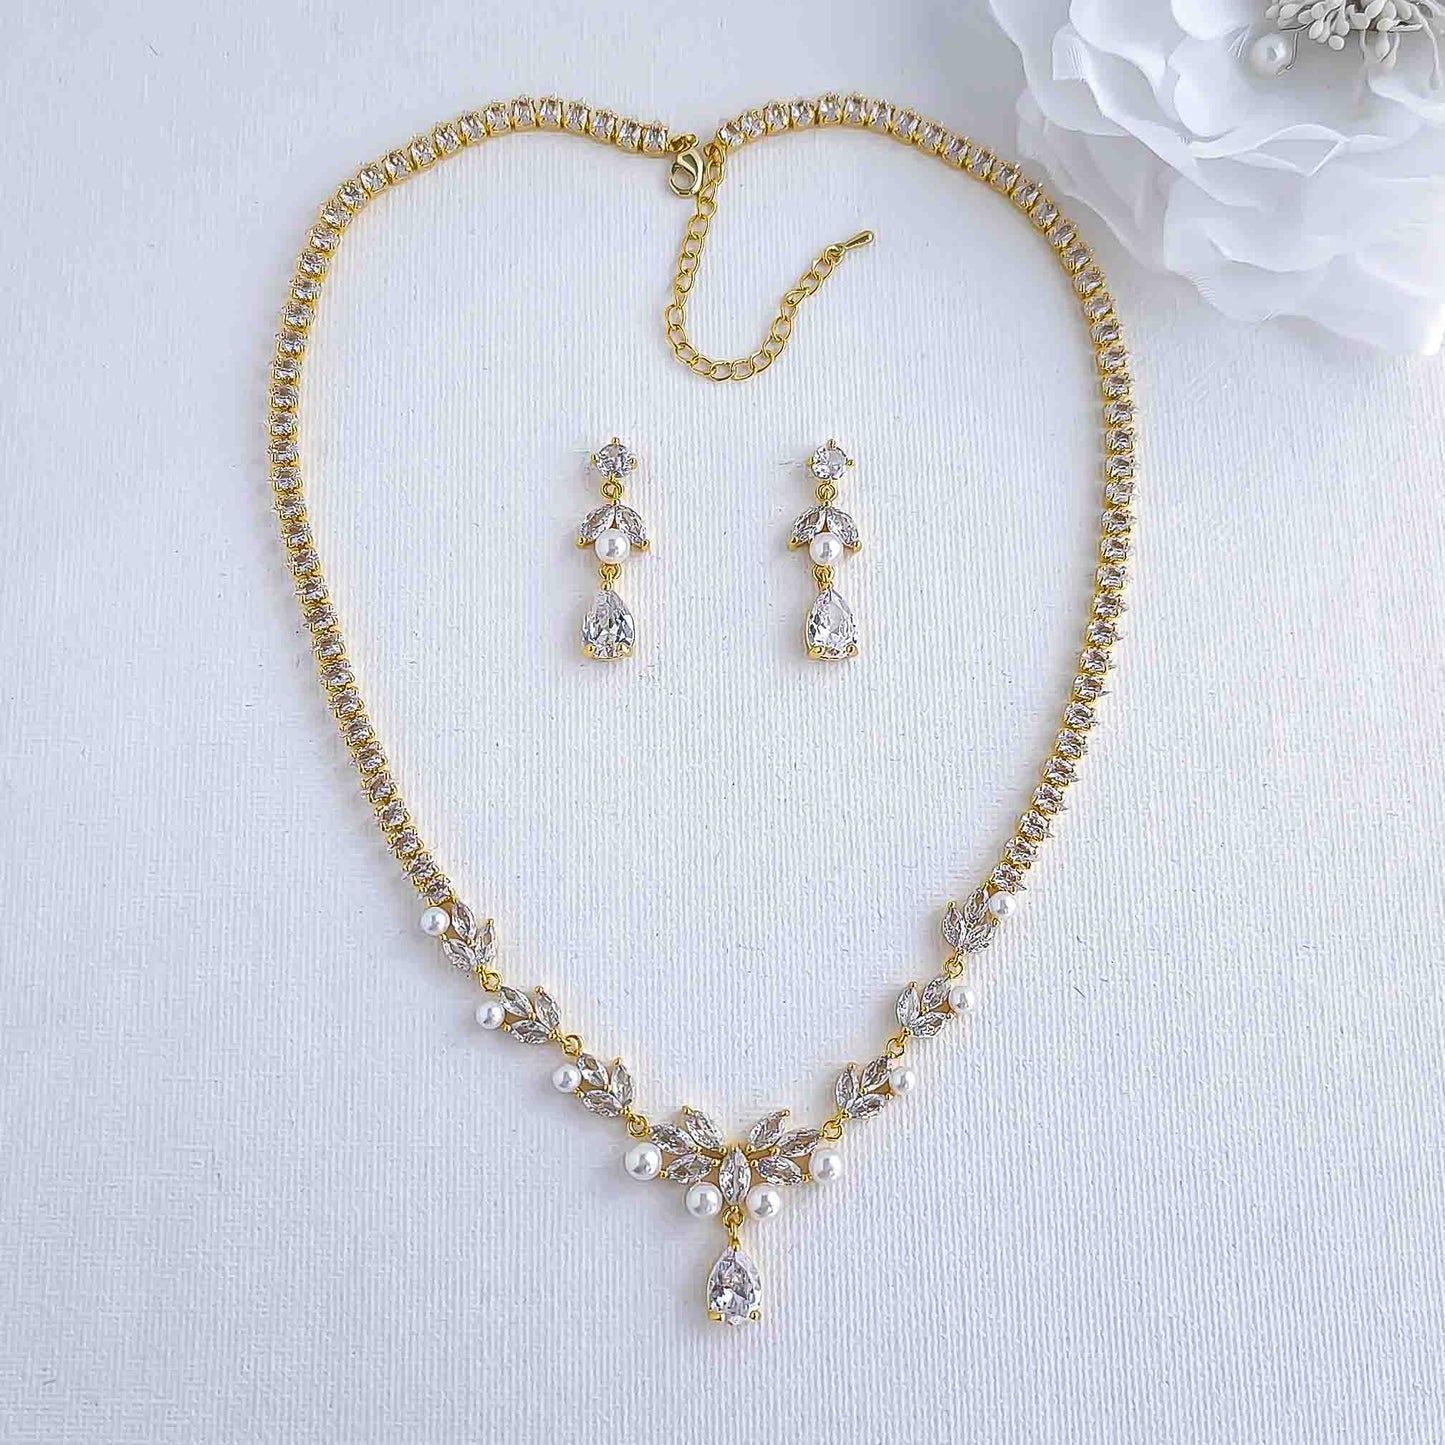 Pearl Wedding Jewellery Set of Necklace and Earrings-Jenna